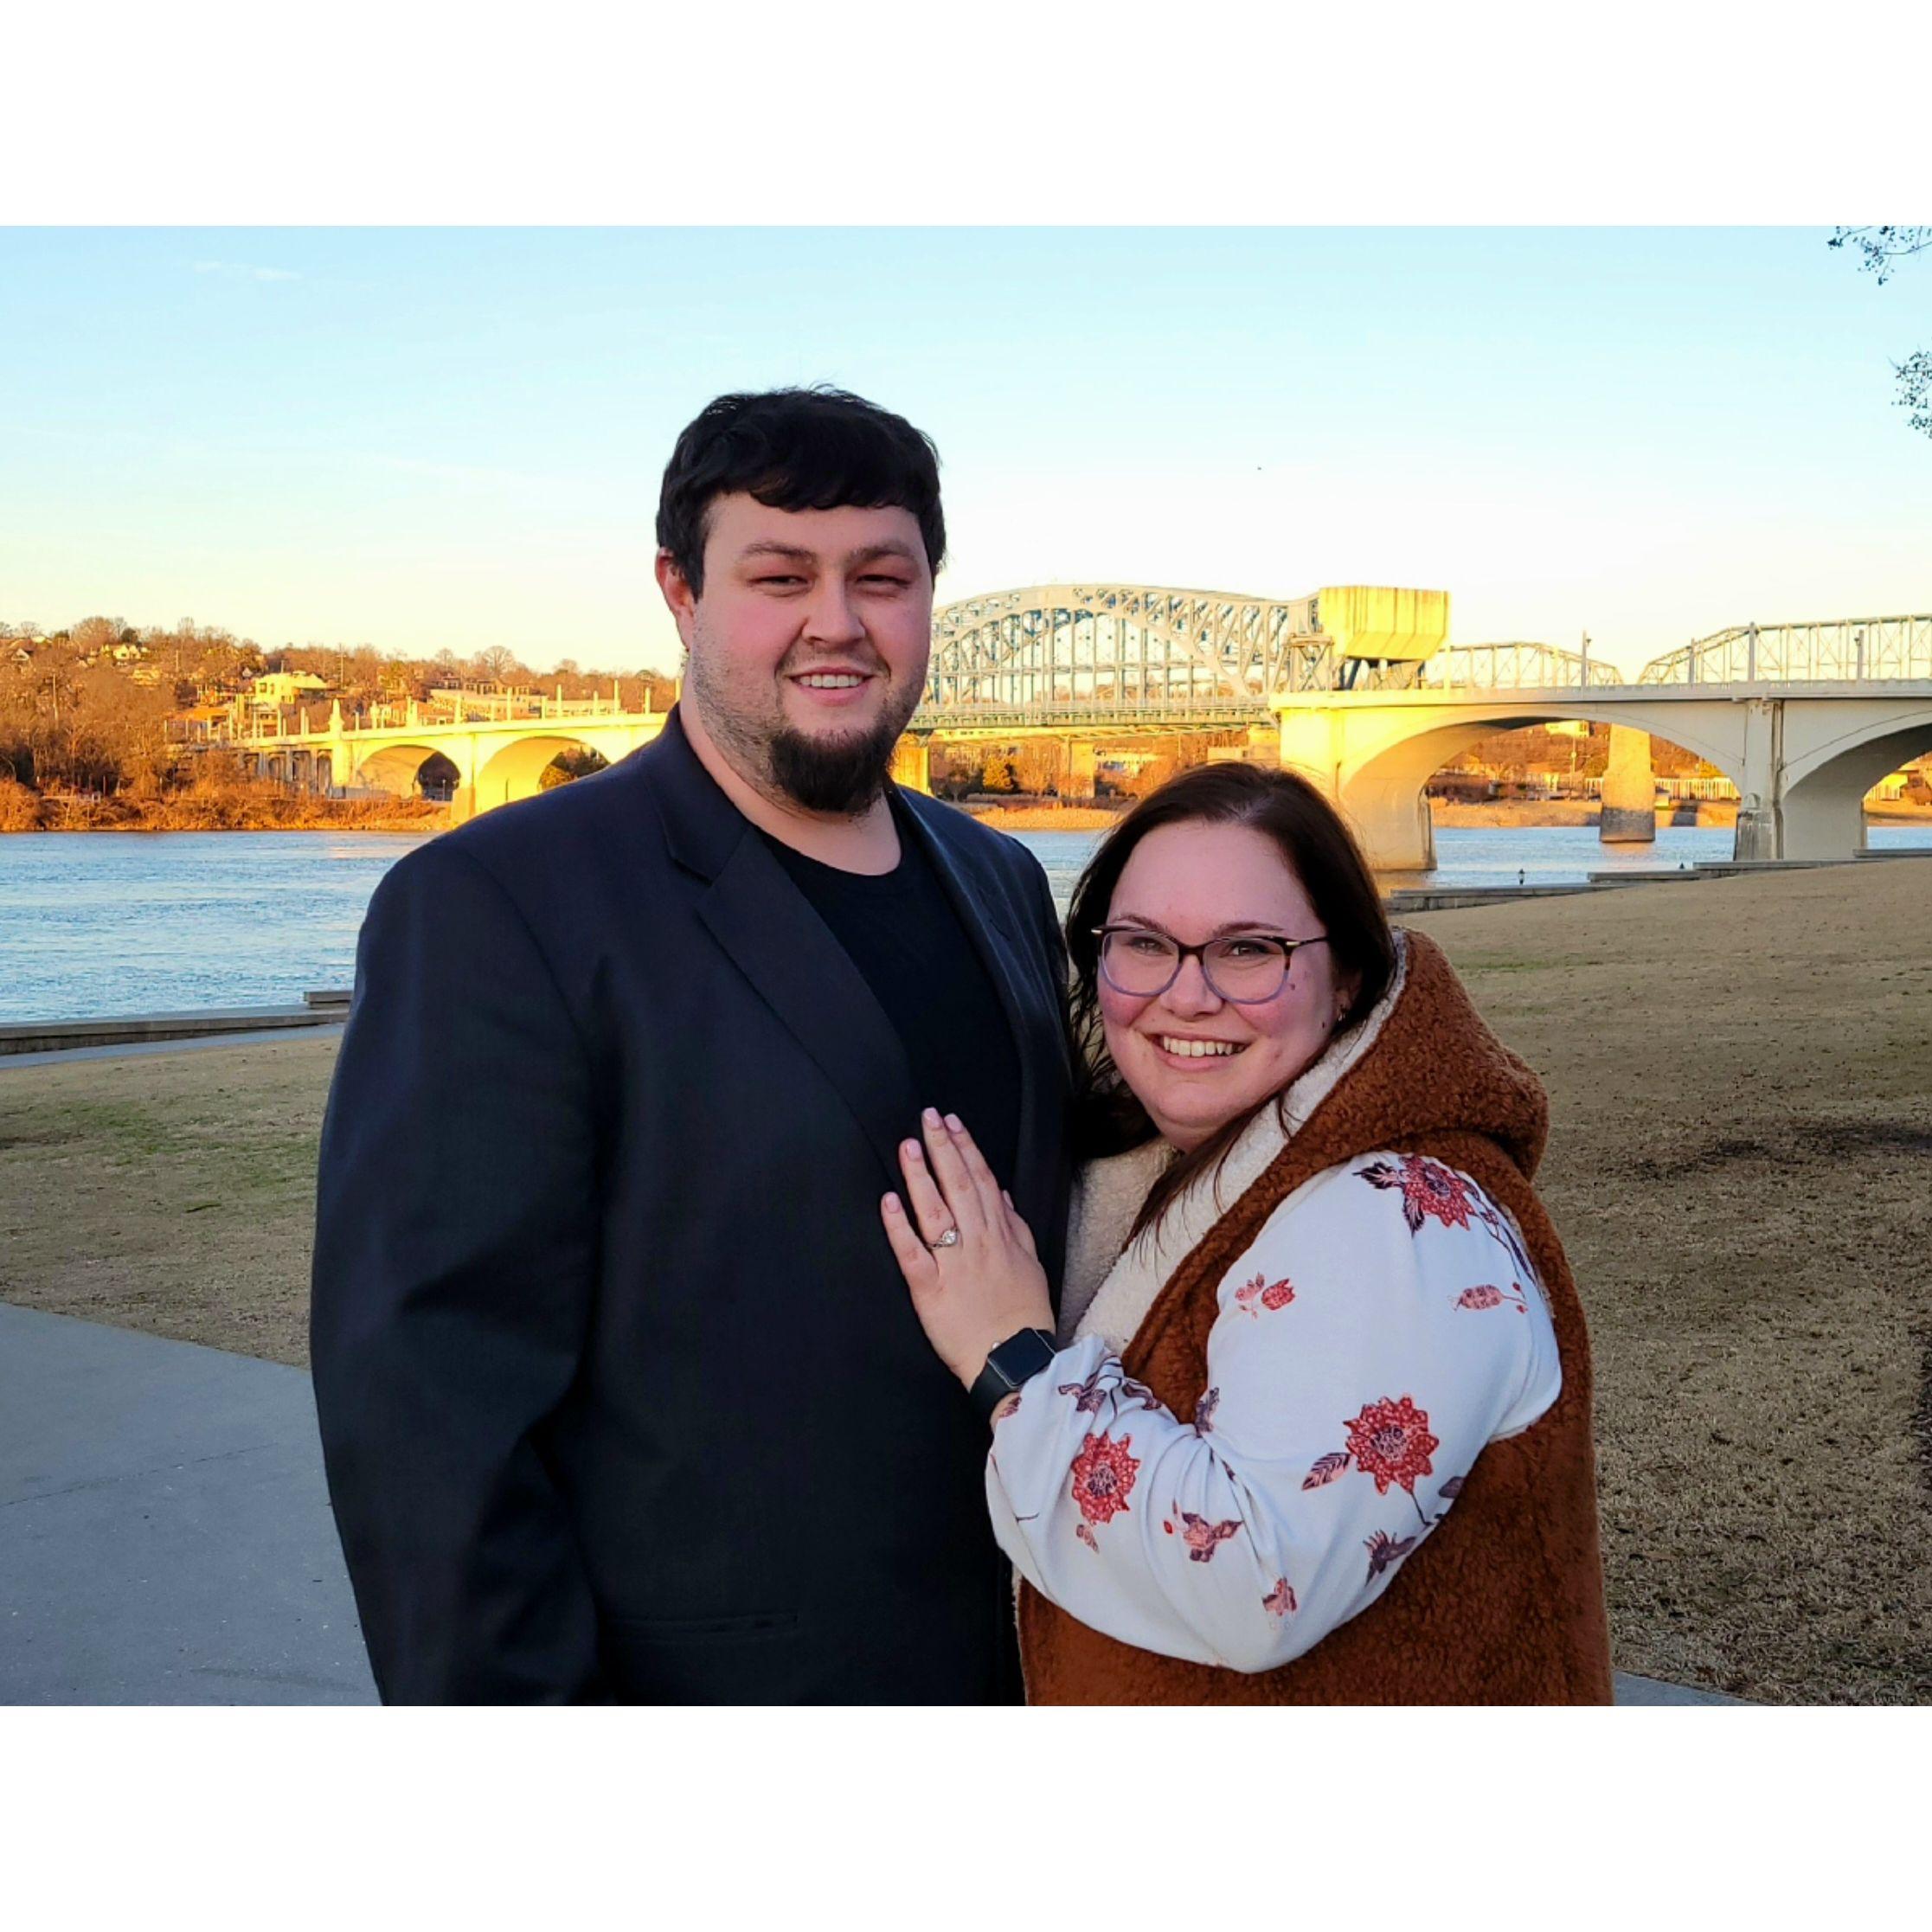 She said, "YES!"  
Chattanooga, Tennessee